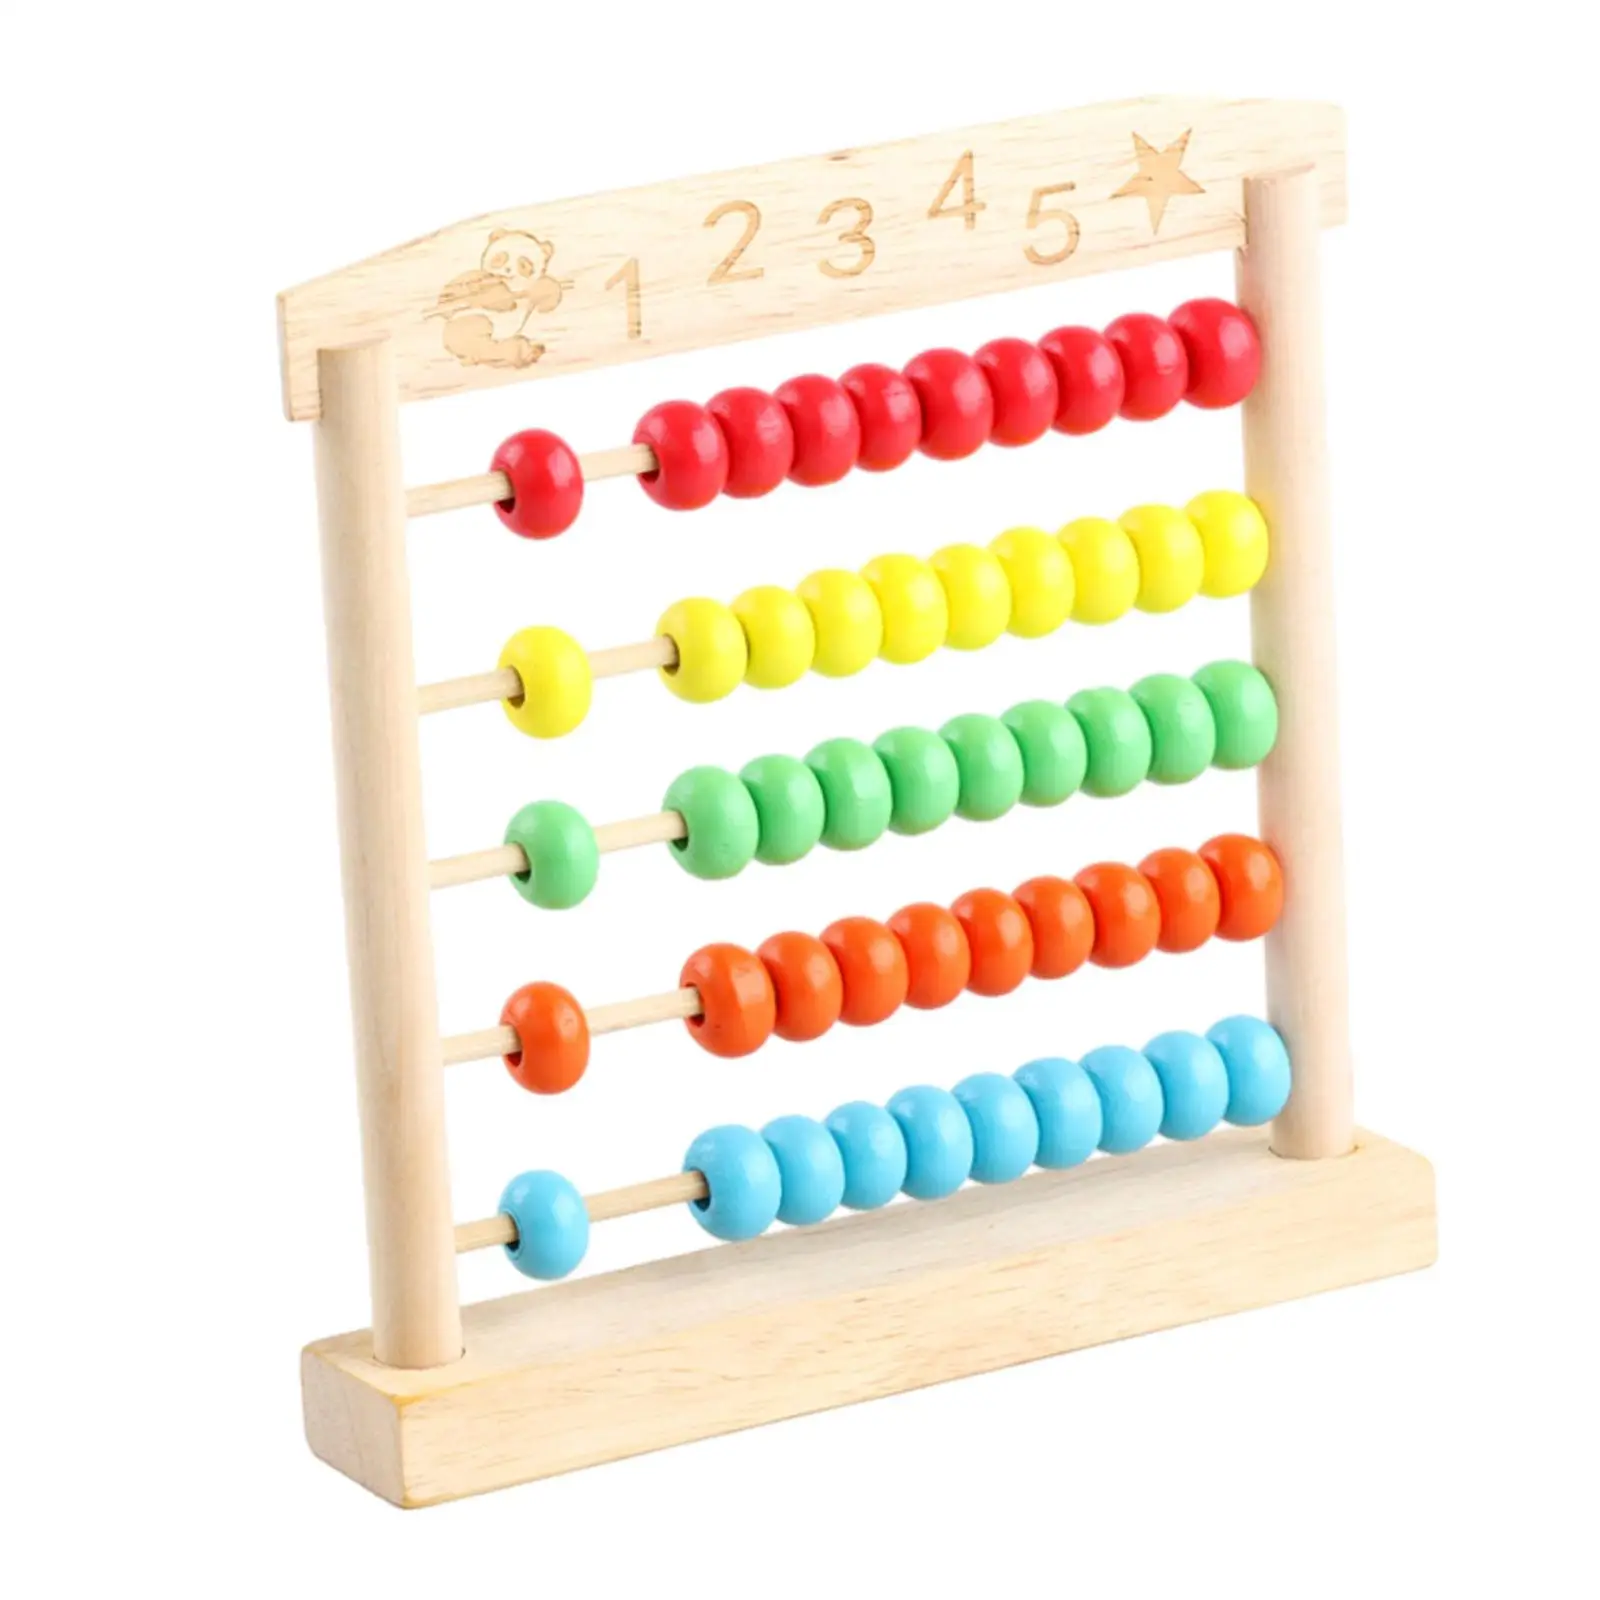 Wooden Counting Frame Montessori Toy Wooden Counting Toys Counting Abacus Toy for Preschool Children Kids Kindergarten Baby